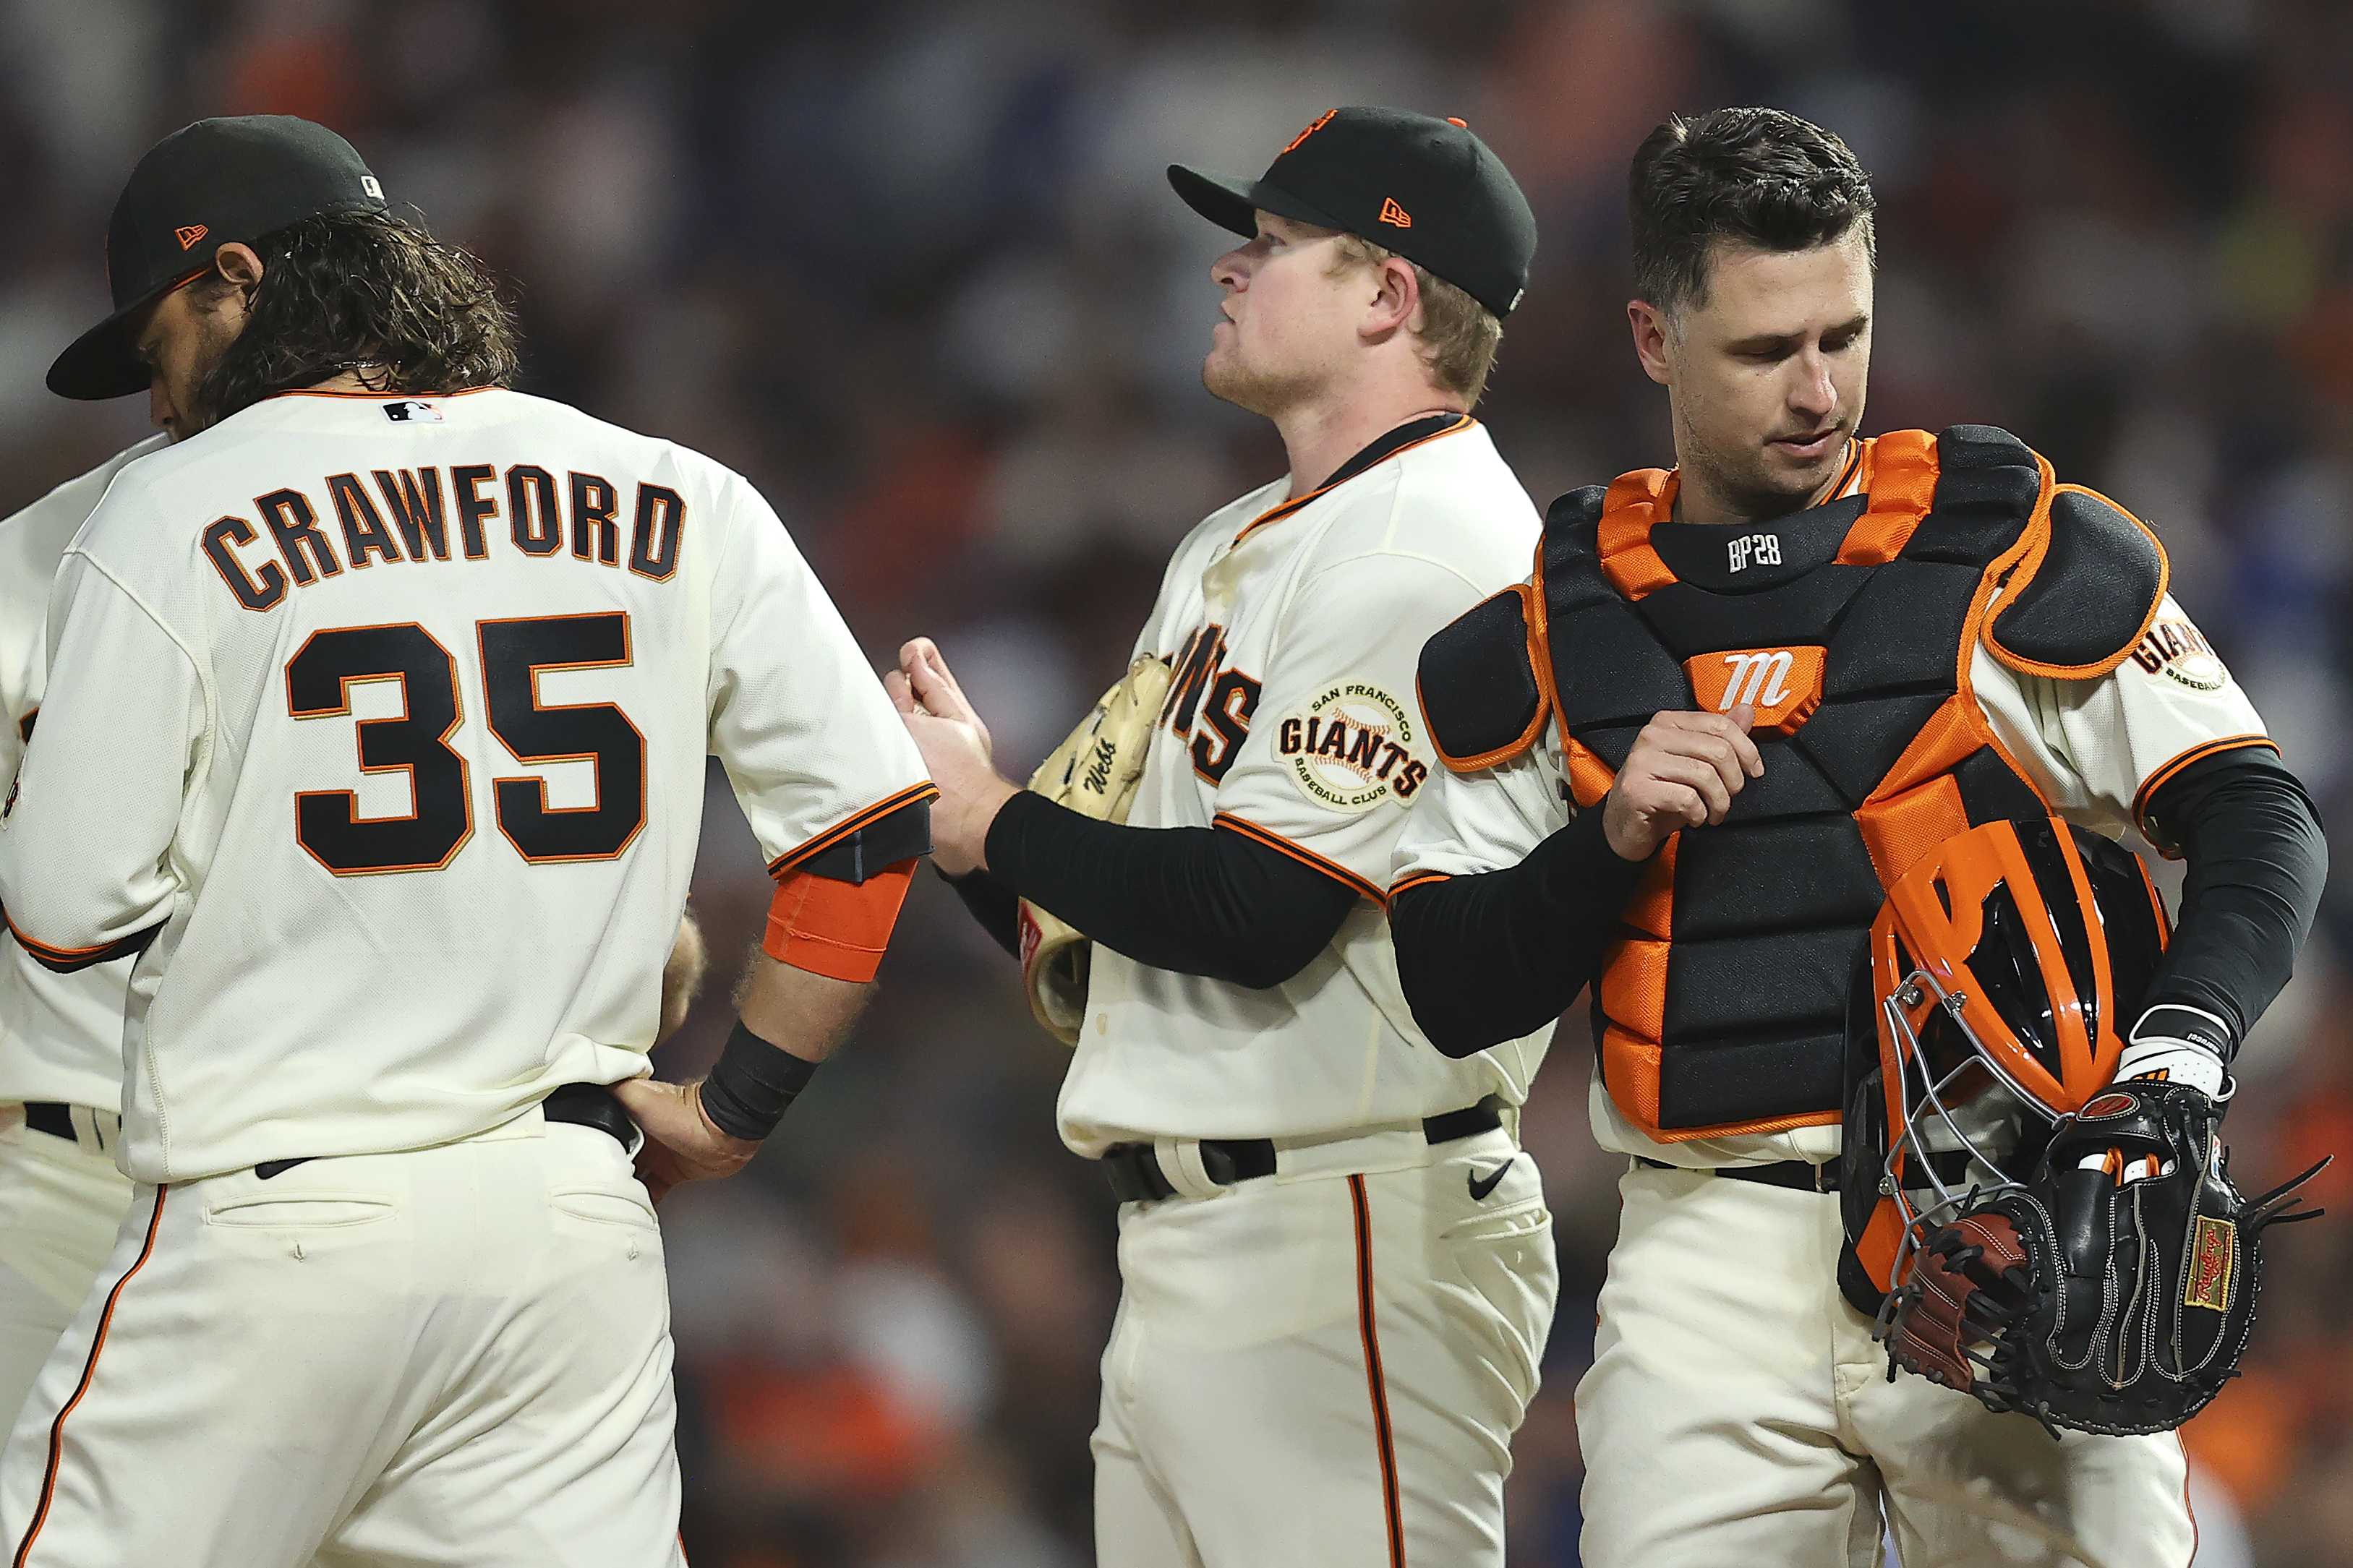 SF Giants' Buster Posey to sit out 2020 season, adopt twin girls